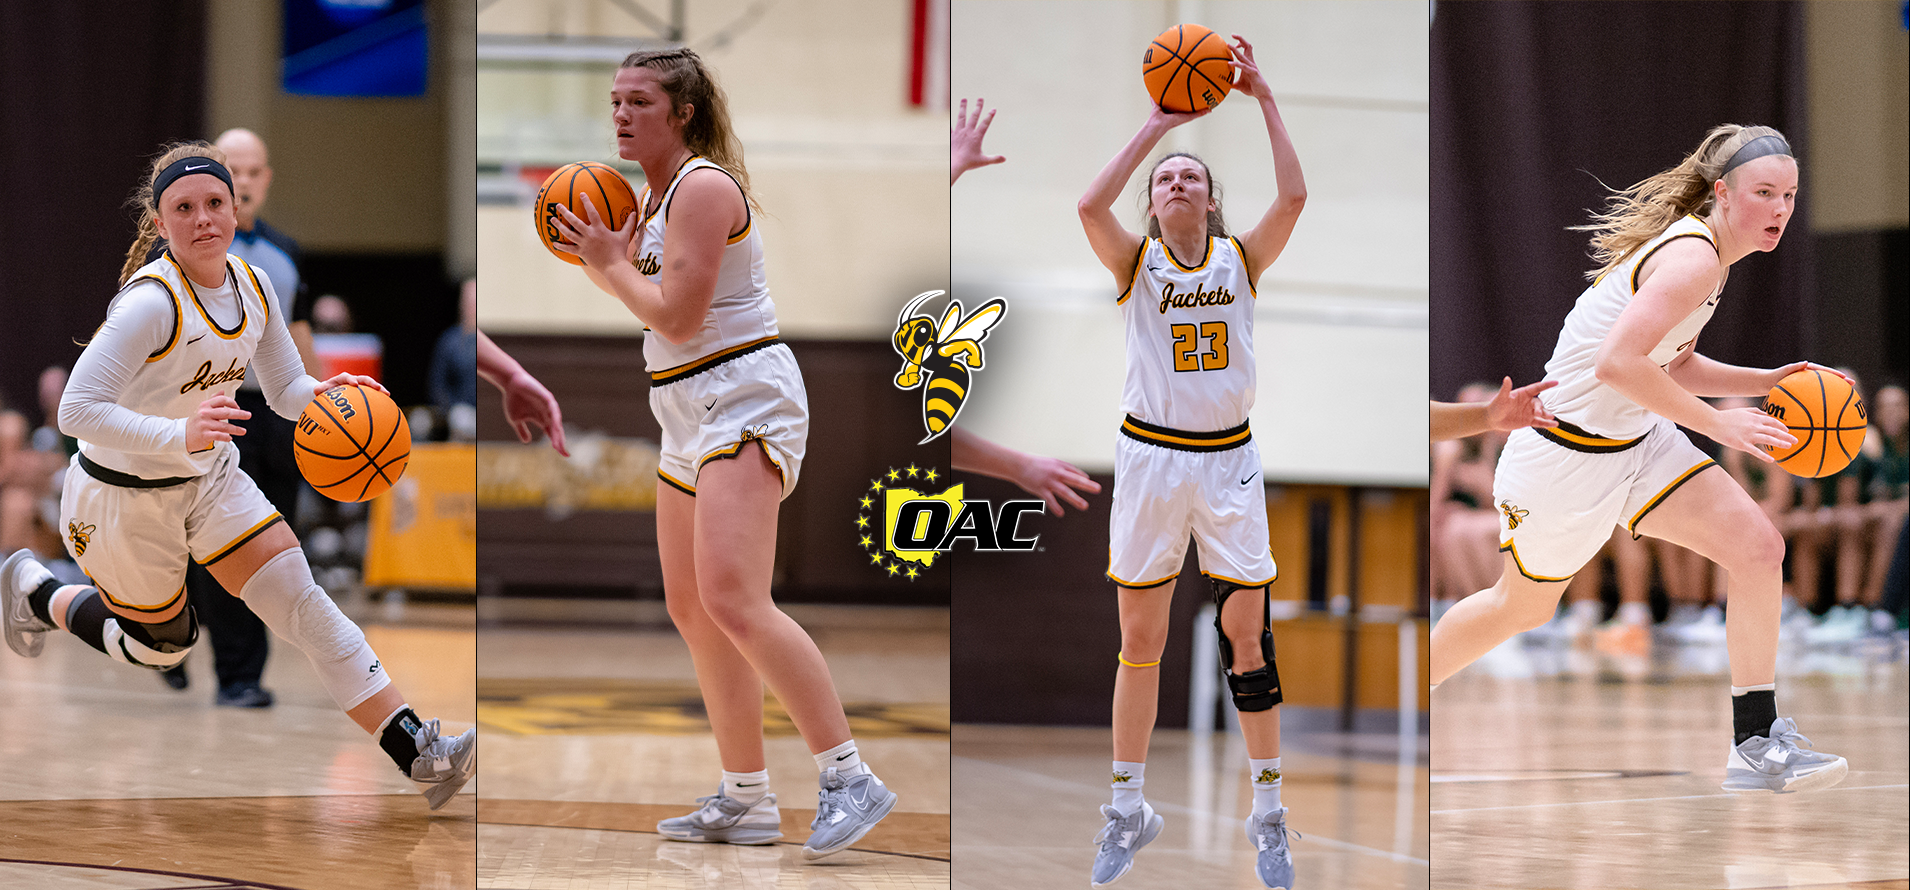 Pictured left to right: Emily Irwin, Bella Vaillant, and Caely Ressler (photos courtesy of Erik Drost '11)